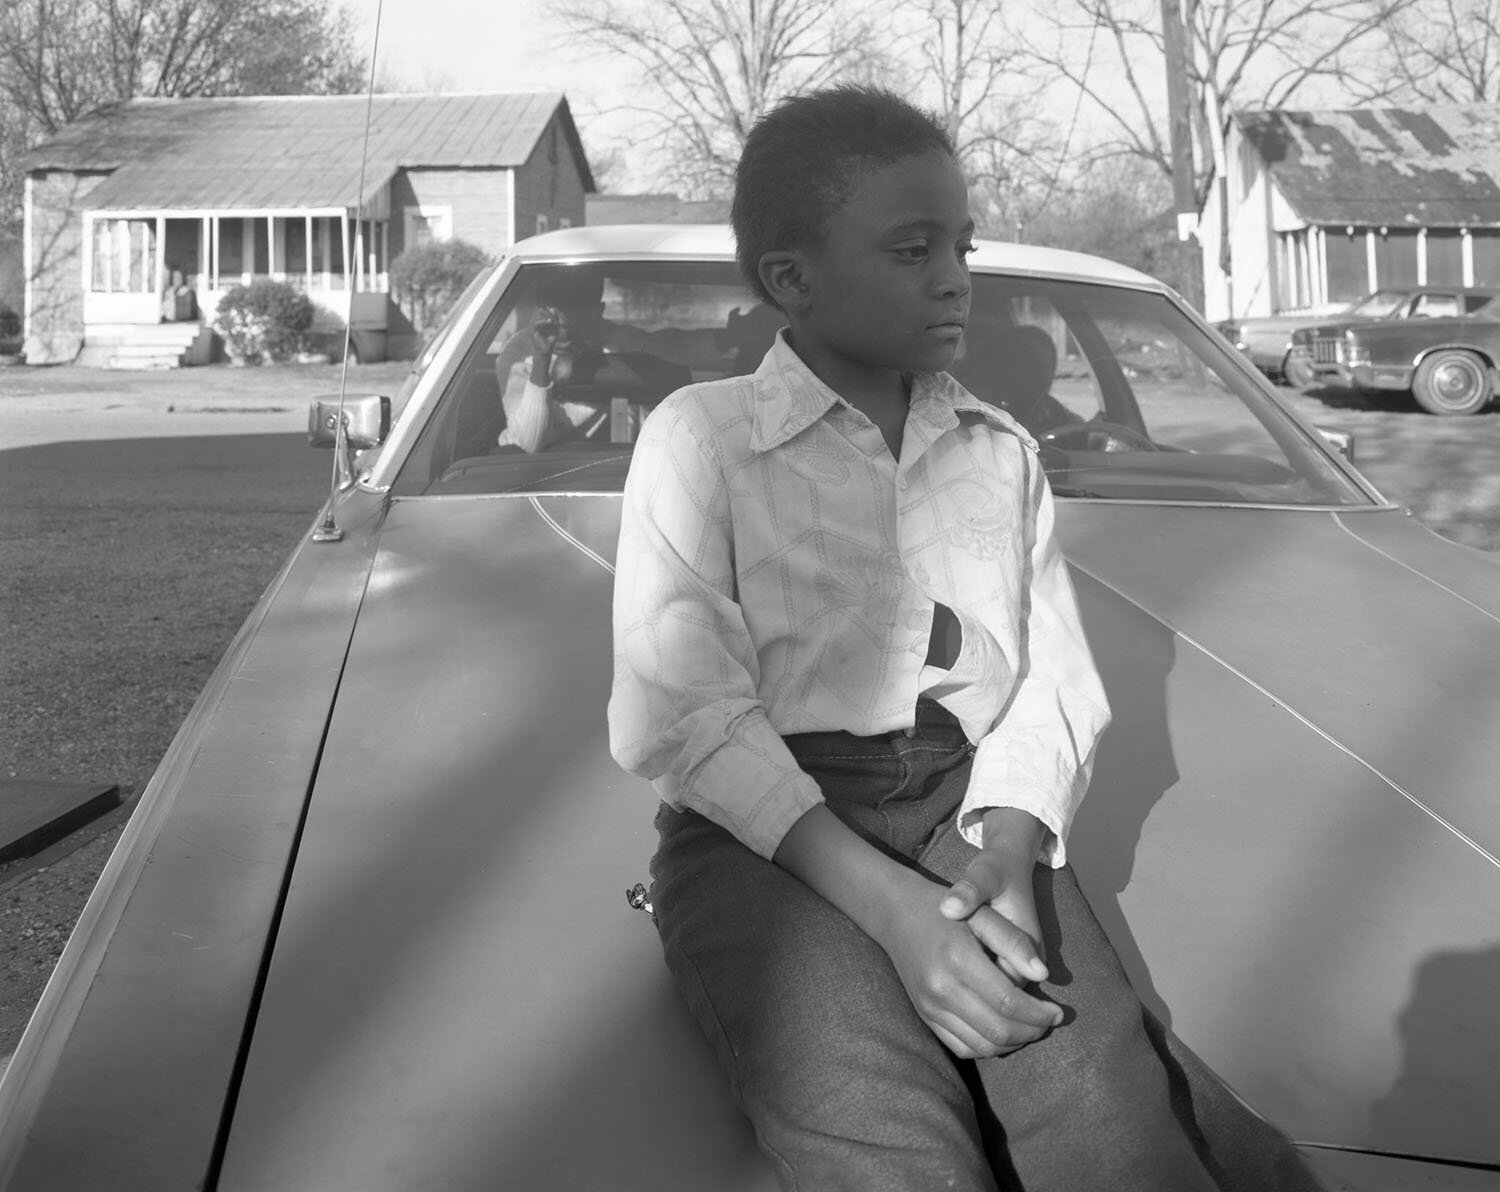   Child on Hood, Hughes, AR , 1984 Archival pigment print  15 × 19 in. (image size) The Do Good Fund, Inc., 2016-24 